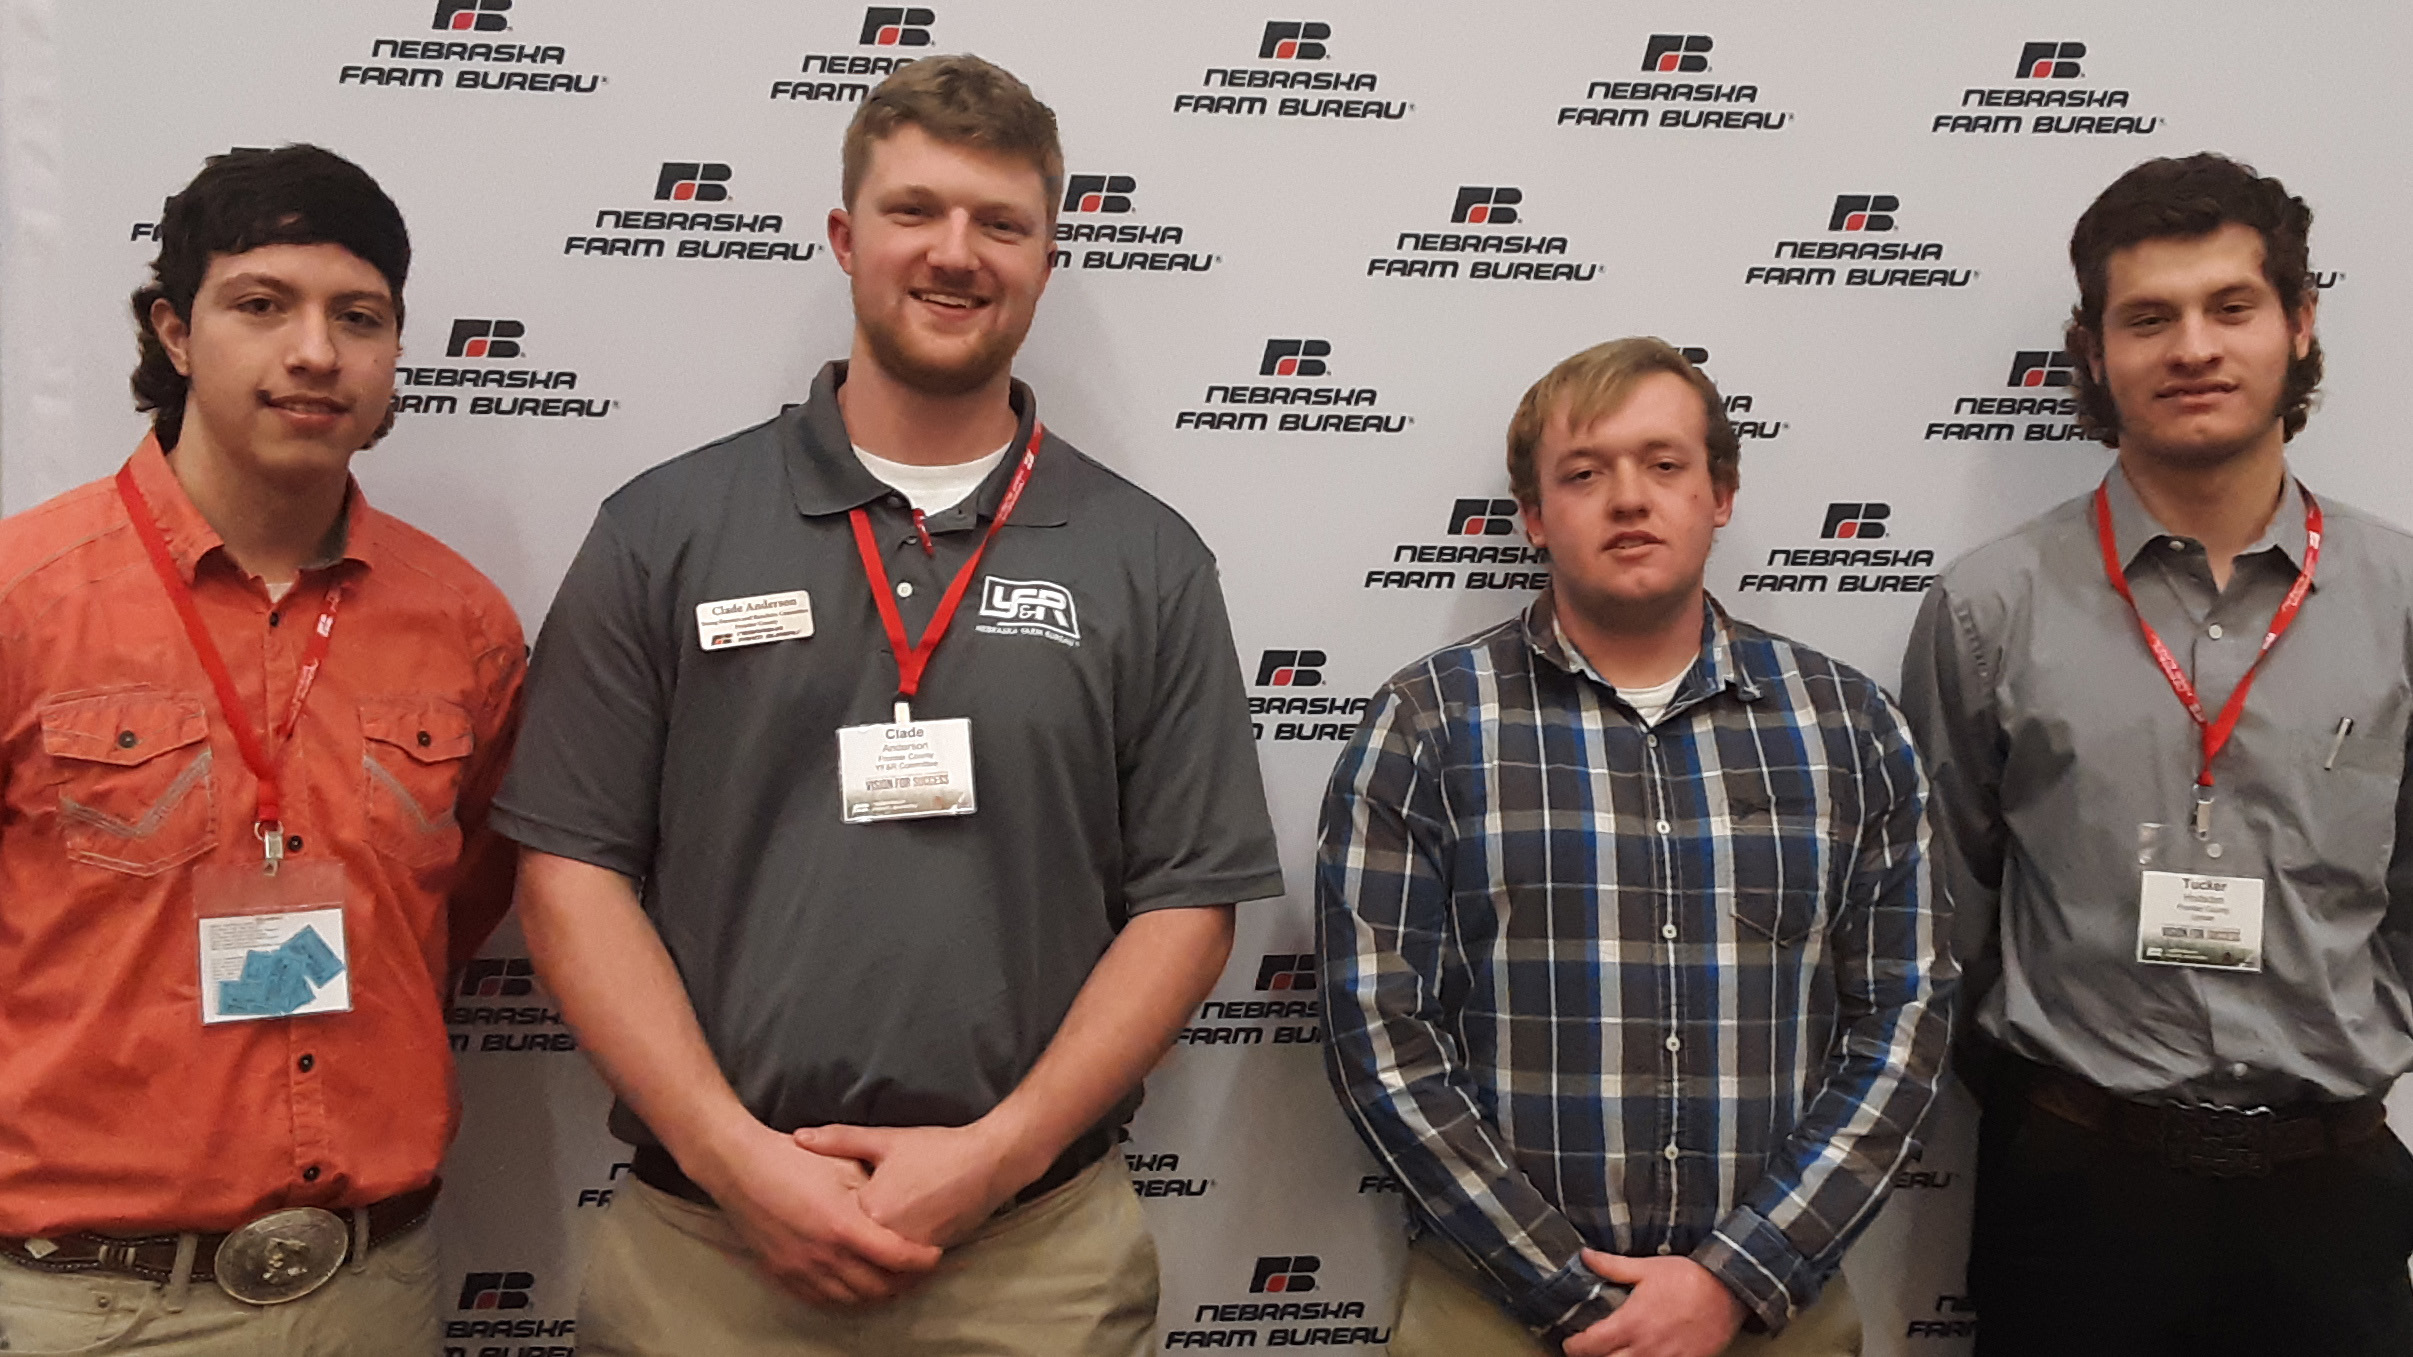 NCTA Aggie students participating in the recent Young Farmers & Ranchers Conference in Kearney were, from left, Gilbert Herrera, Lexington; Clade Anderson, Otis, Kansas; Chase Callahan, Farnam; and Tucker Hodsden, Lyman. (Photo by B. Ramsdale / NCTA)